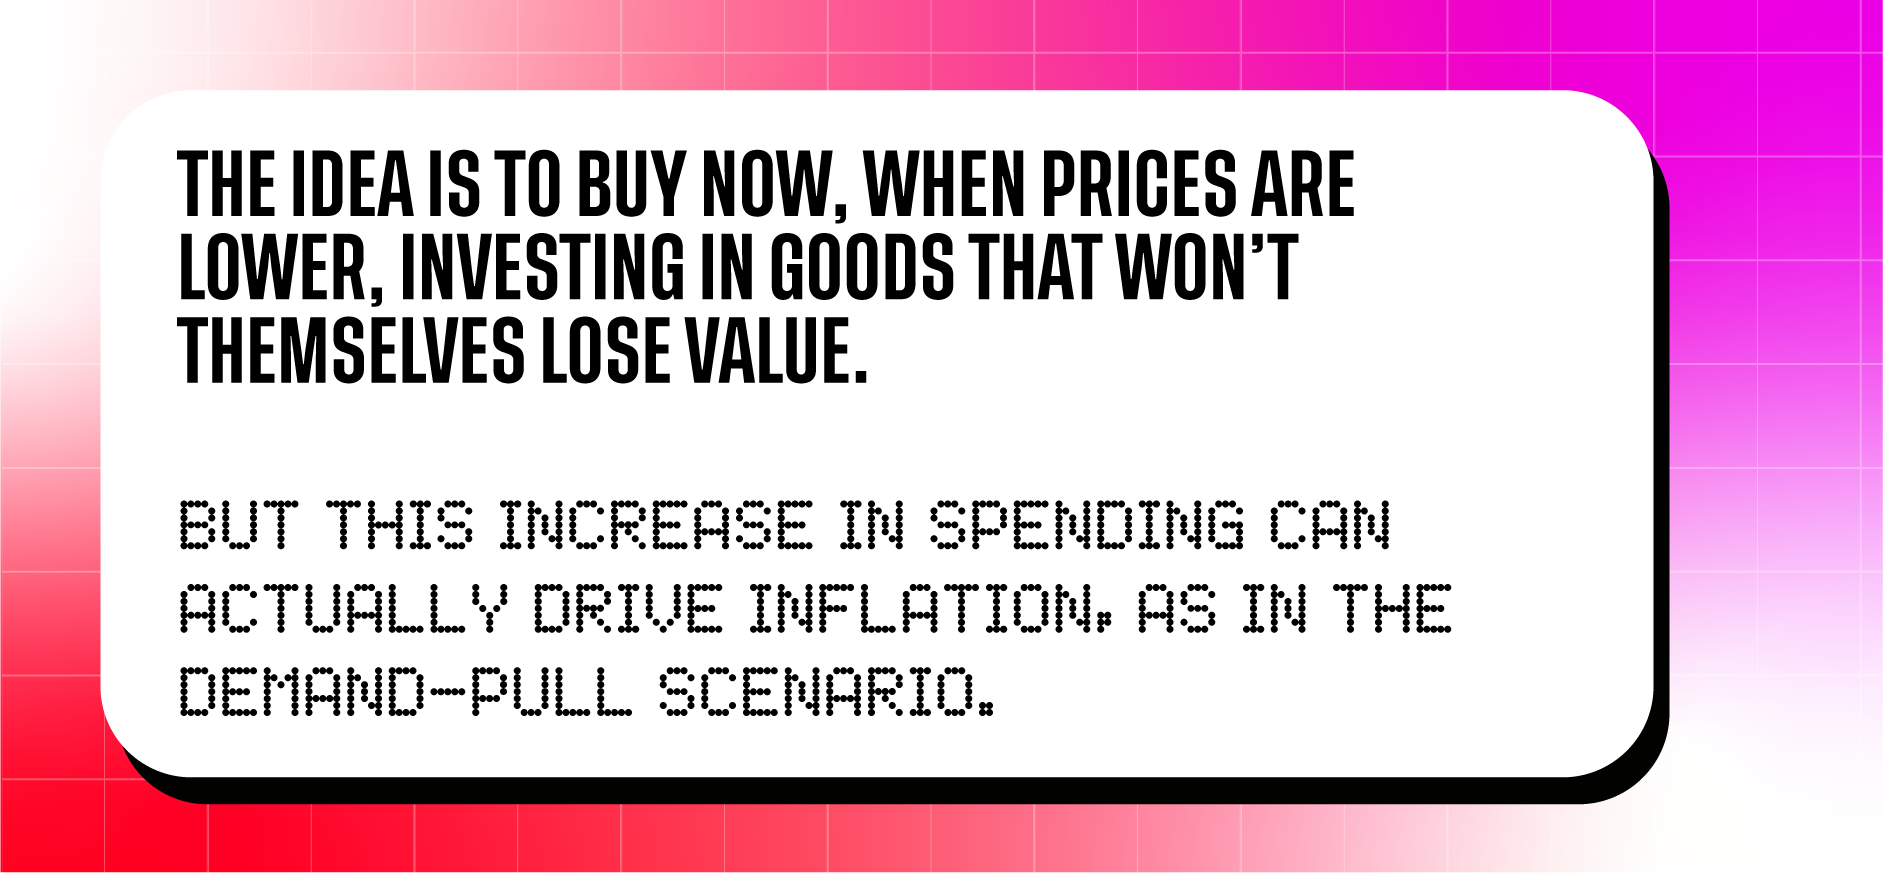 The idea is to buy now, when prices are lower, investing in goods that won't themselves lose value. But this increase in spending can actually drive inflation, as in the demand-pull scenario.